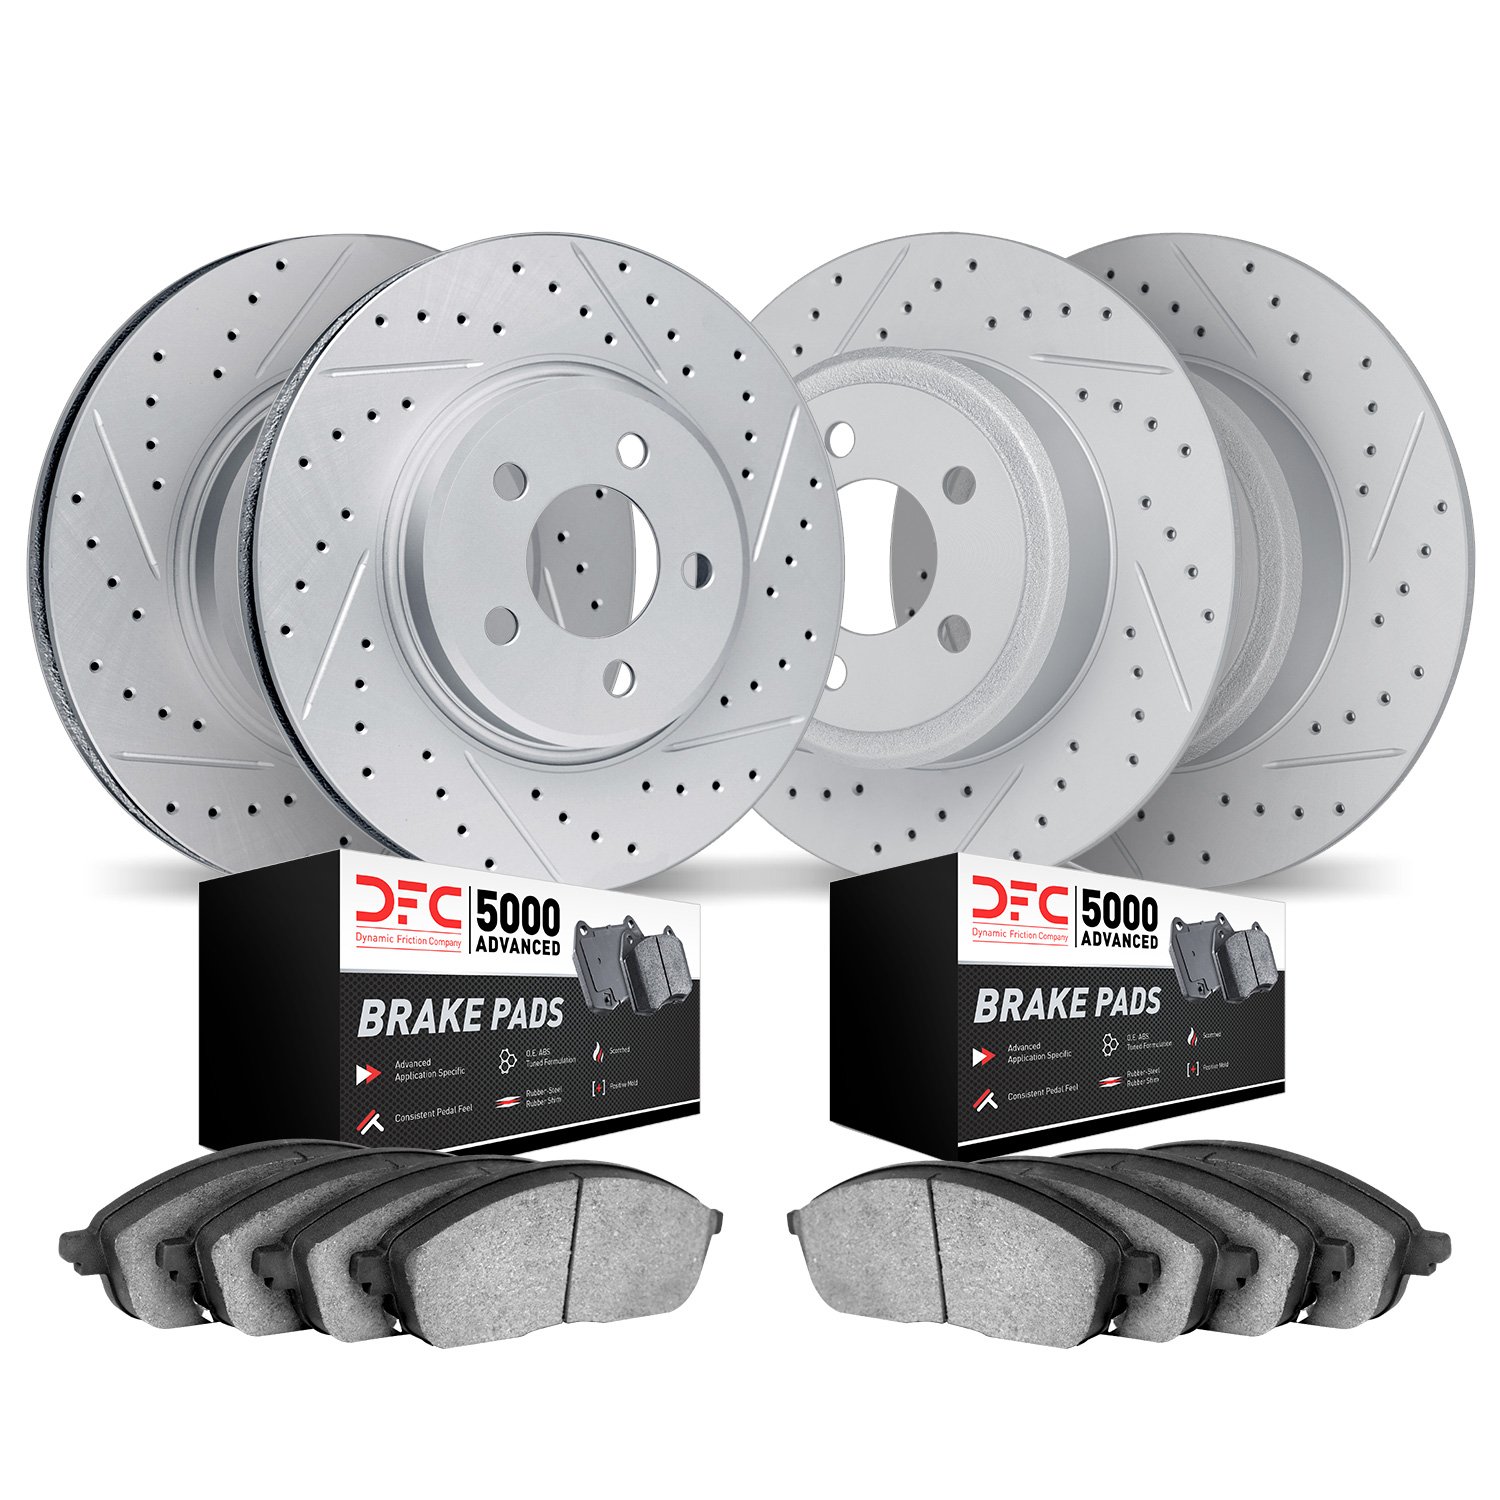 2504-54217 Geoperformance Drilled/Slotted Rotors w/5000 Advanced Brake Pads Kit, 2015-2020 Ford/Lincoln/Mercury/Mazda, Position: